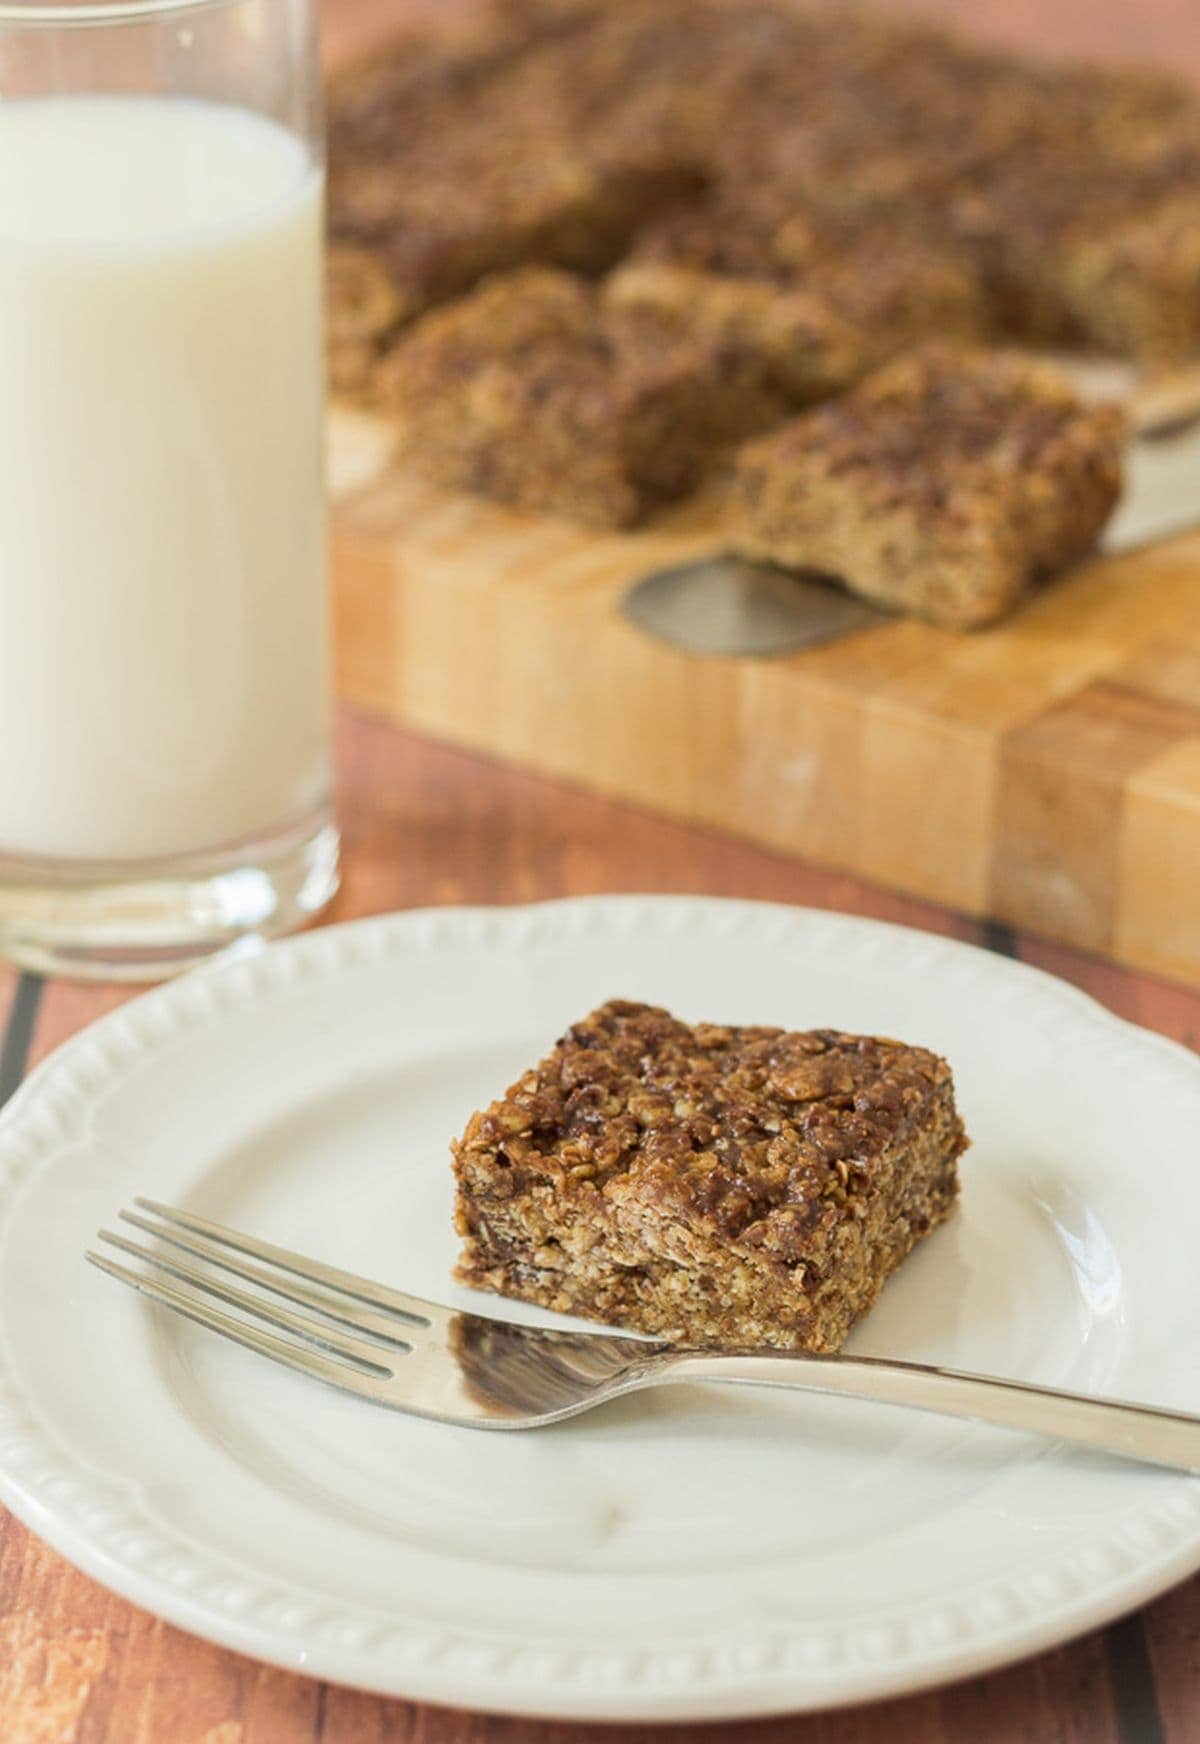 A plate with a no bake chocolate oatmeal bar on. Fork to the side and a glass of milk and chopping board with the rest of the oat bars on in the background.